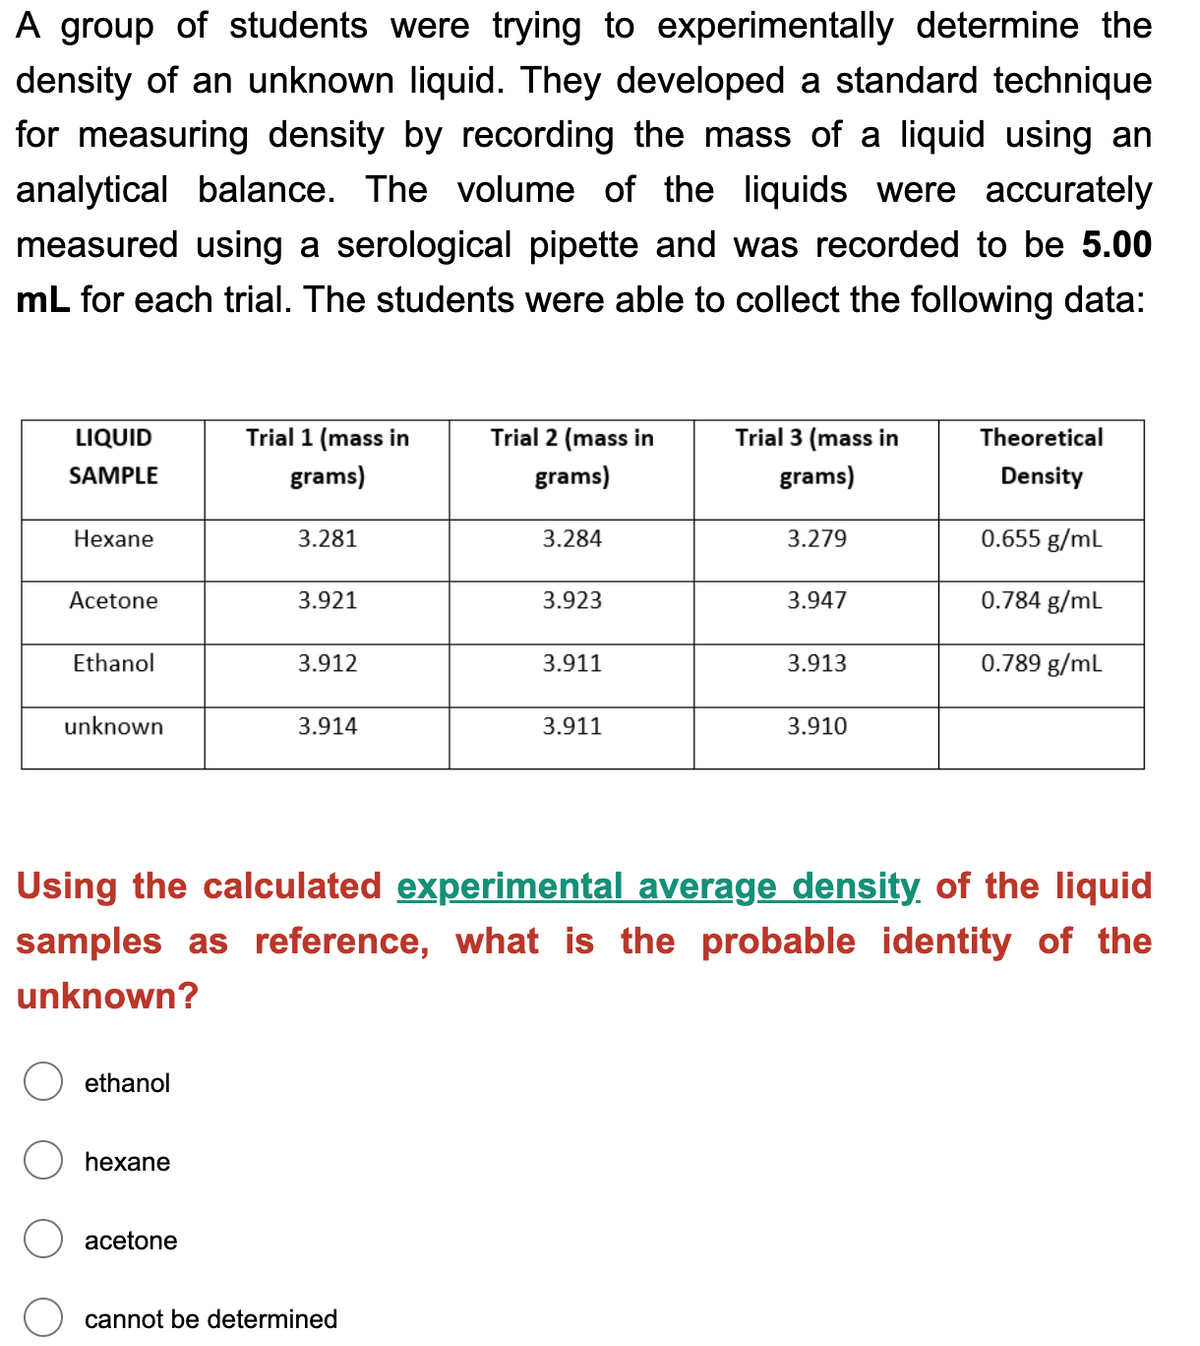 A group of students were trying to experimentally determine the
density of an unknown liquid. They developed a standard technique
for measuring density by recording the mass of a liquid using an
analytical balance. The volume of the liquids were accurately
measured using a serological pipette and was recorded to be 5.00
mL for each trial. The students were able to collect the following data:
LIQUID
Trial 1 (mass in
Trial 2 (mass in
Trial 3 (mass in
Theoretical
SAMPLE
grams)
grams)
grams)
Density
Hexane
3.281
3.284
3.279
0.655 g/ml
Acetone
3.921
3.923
3.947
0.784 g/mL
Ethanol
3.912
3.911
3.913
0.789 g/mL
unknown
3.914
3.911
3.910
Using the calculated experimental average density of the liquid
samples as reference, what is the probable identity of the
unknown?
ethanol
heхane
acetone
cannot be determined
